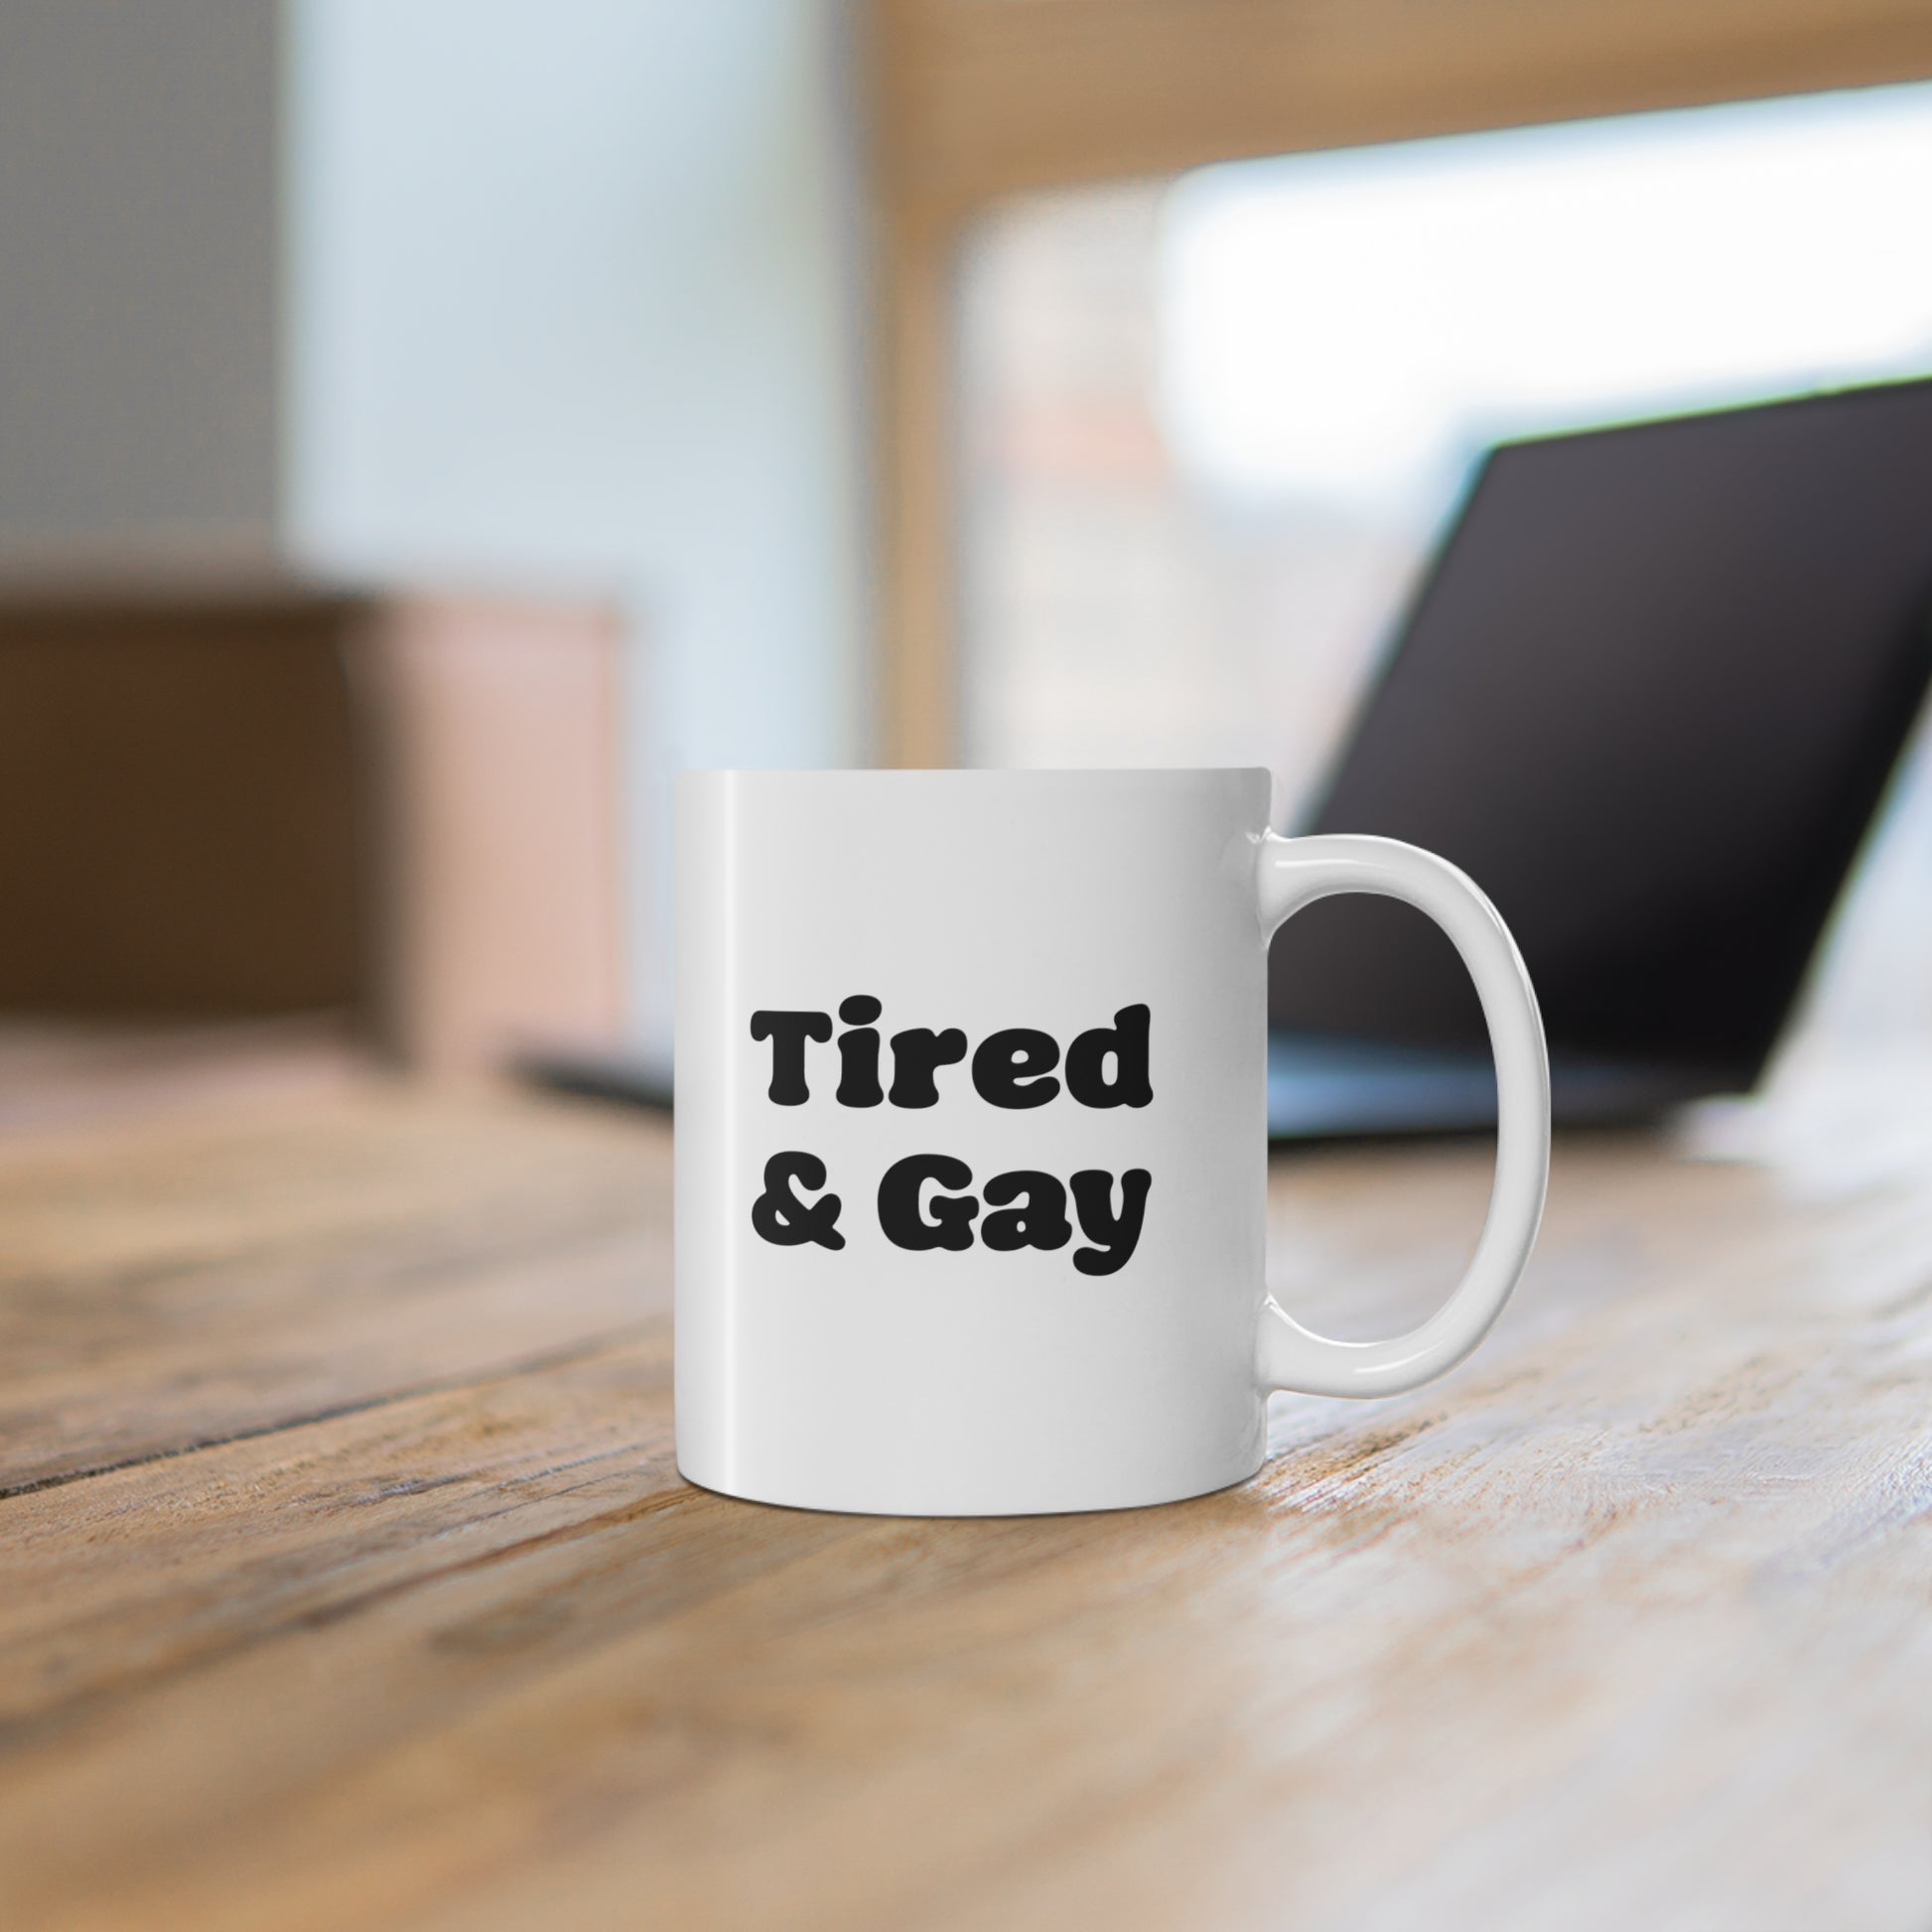 11oz ceramic mug with quote Tired and Gay